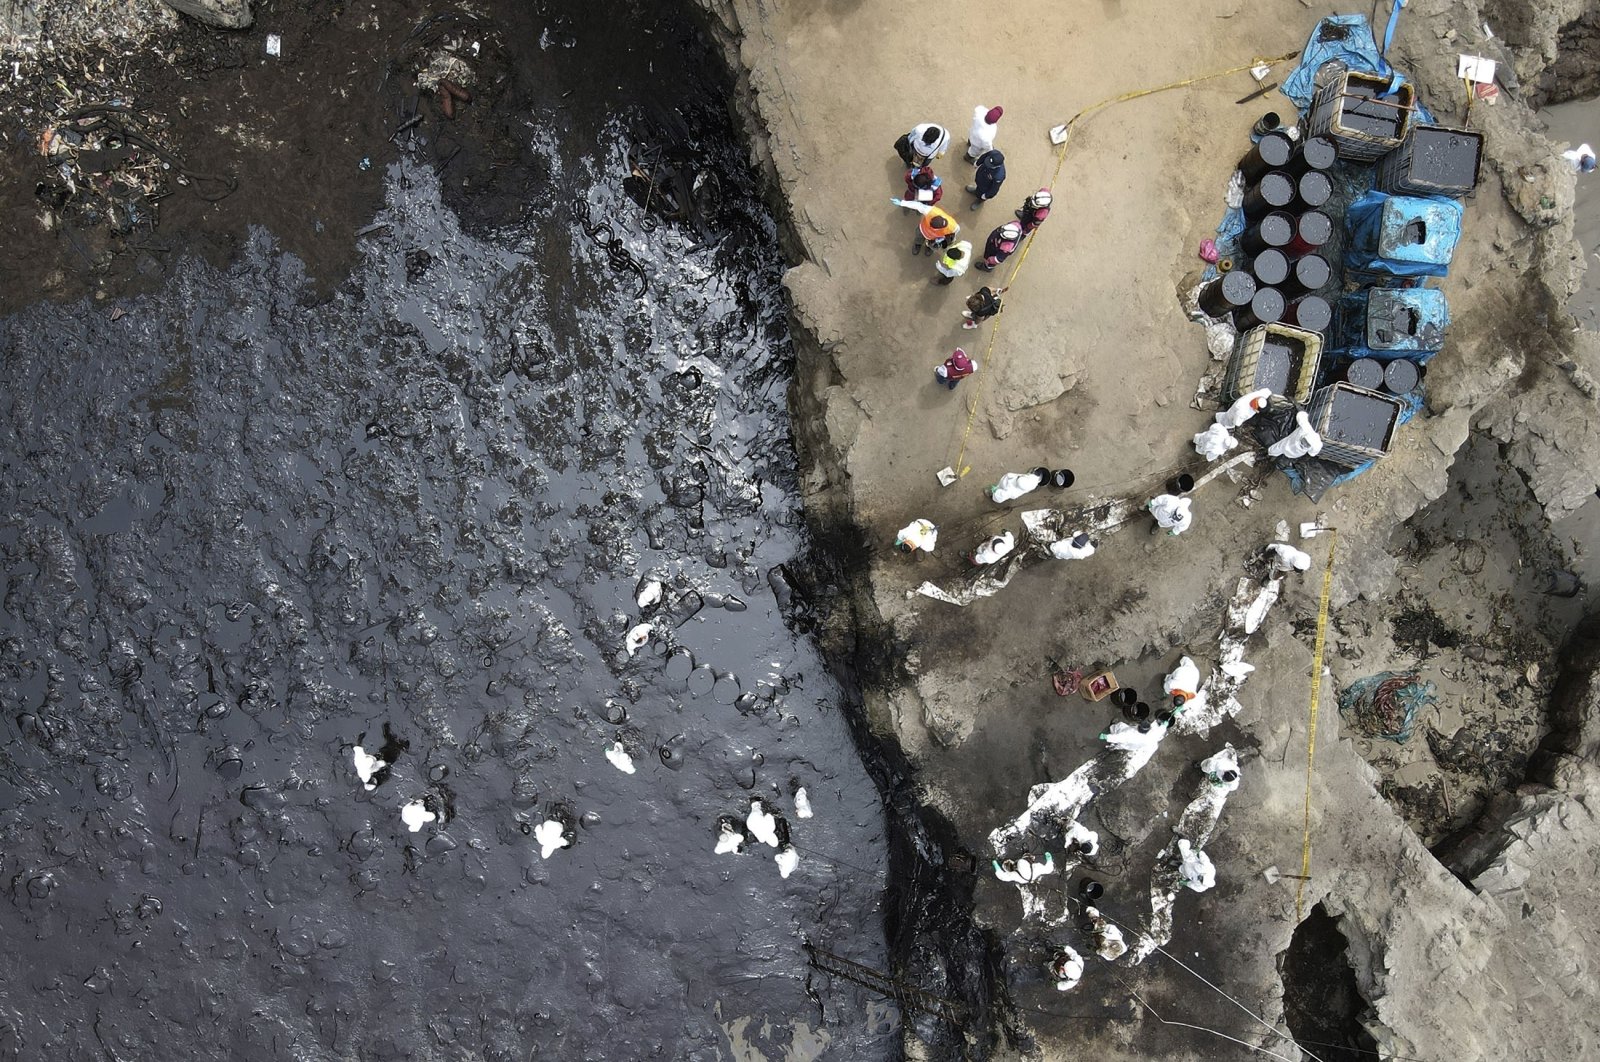 Workers continue in a clean-up campaign after an oil spill, on Cavero Beach in the Ventanilla district of Callao, Peru, Jan. 22, 2022. (AP Photo)